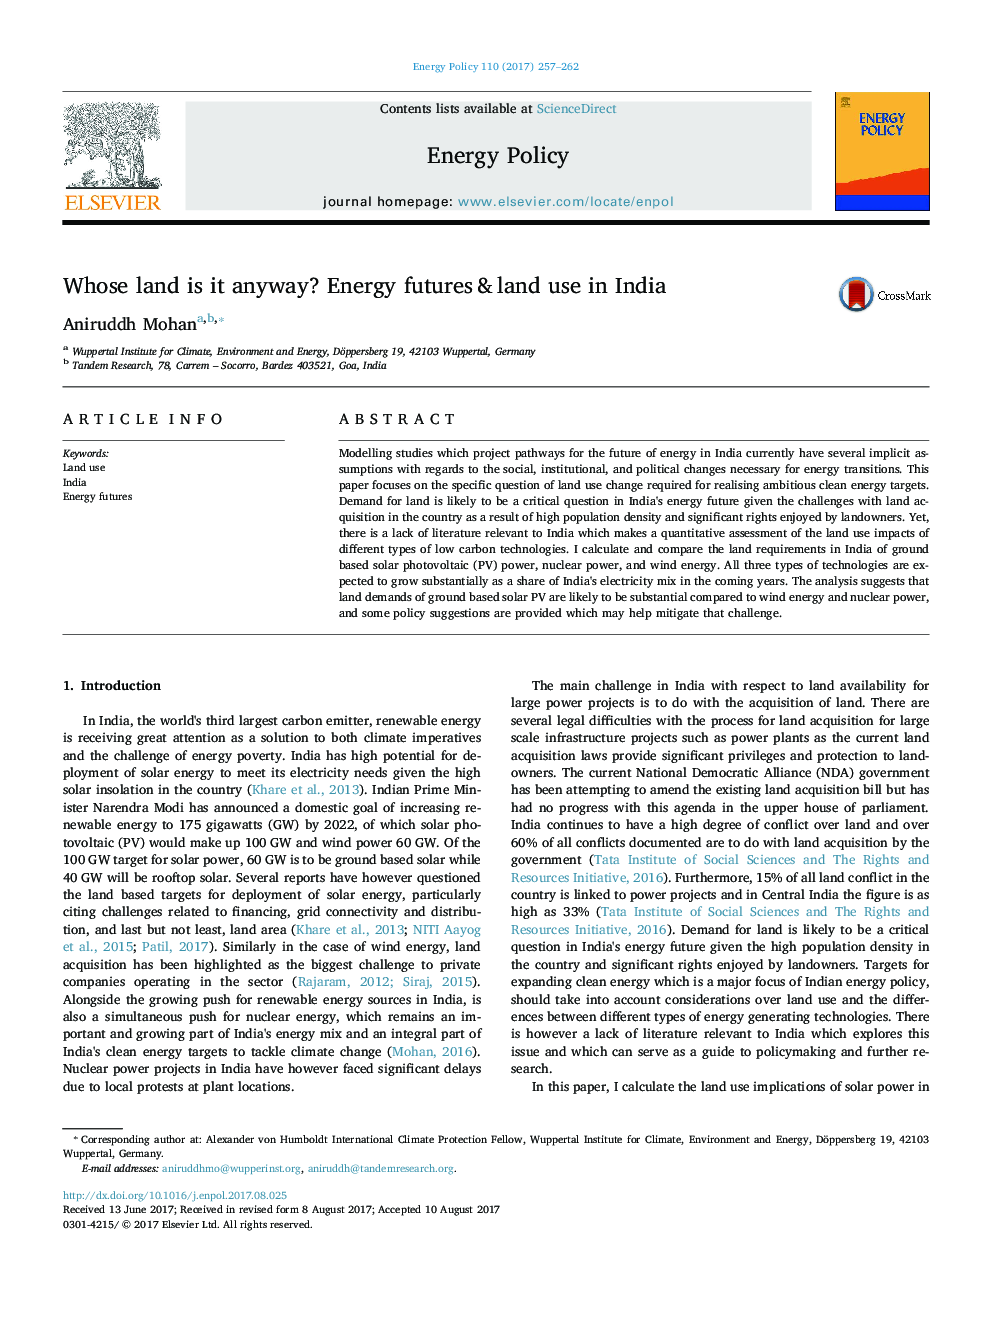 Whose land is it anyway? Energy futures & land use in India